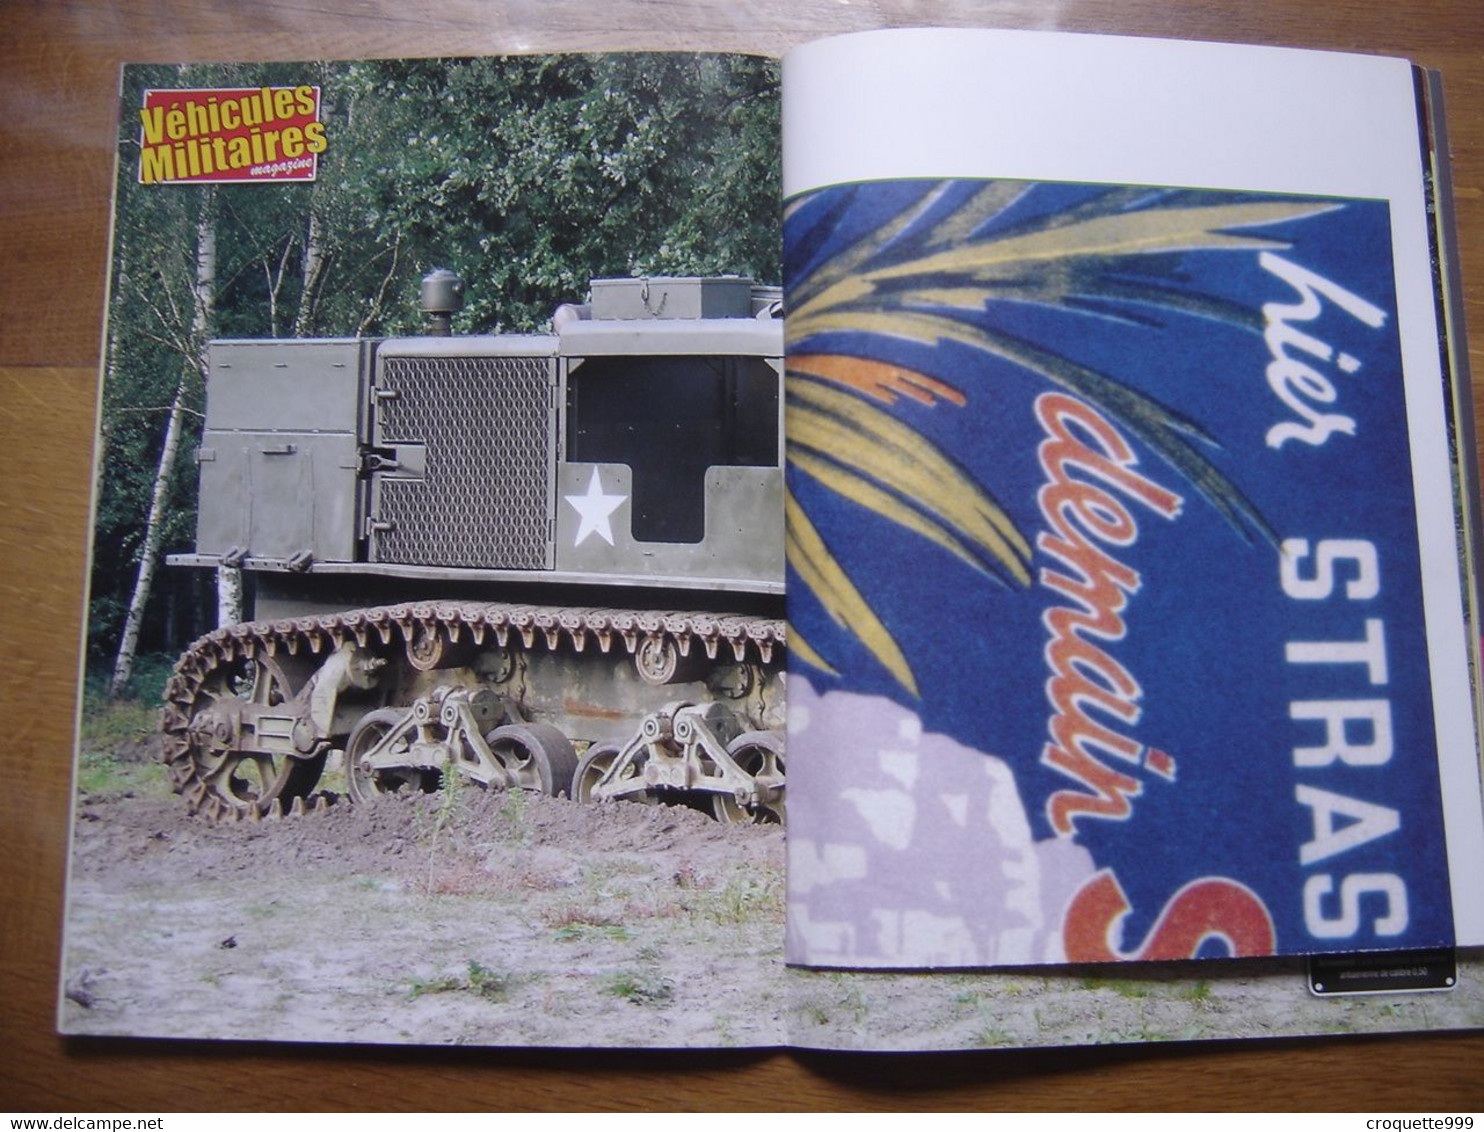 VEHICULES MILITAIRES MAGAZINE 44 Materiel Armee Sommaire En Photo AFFICHE POSTER - Weapons